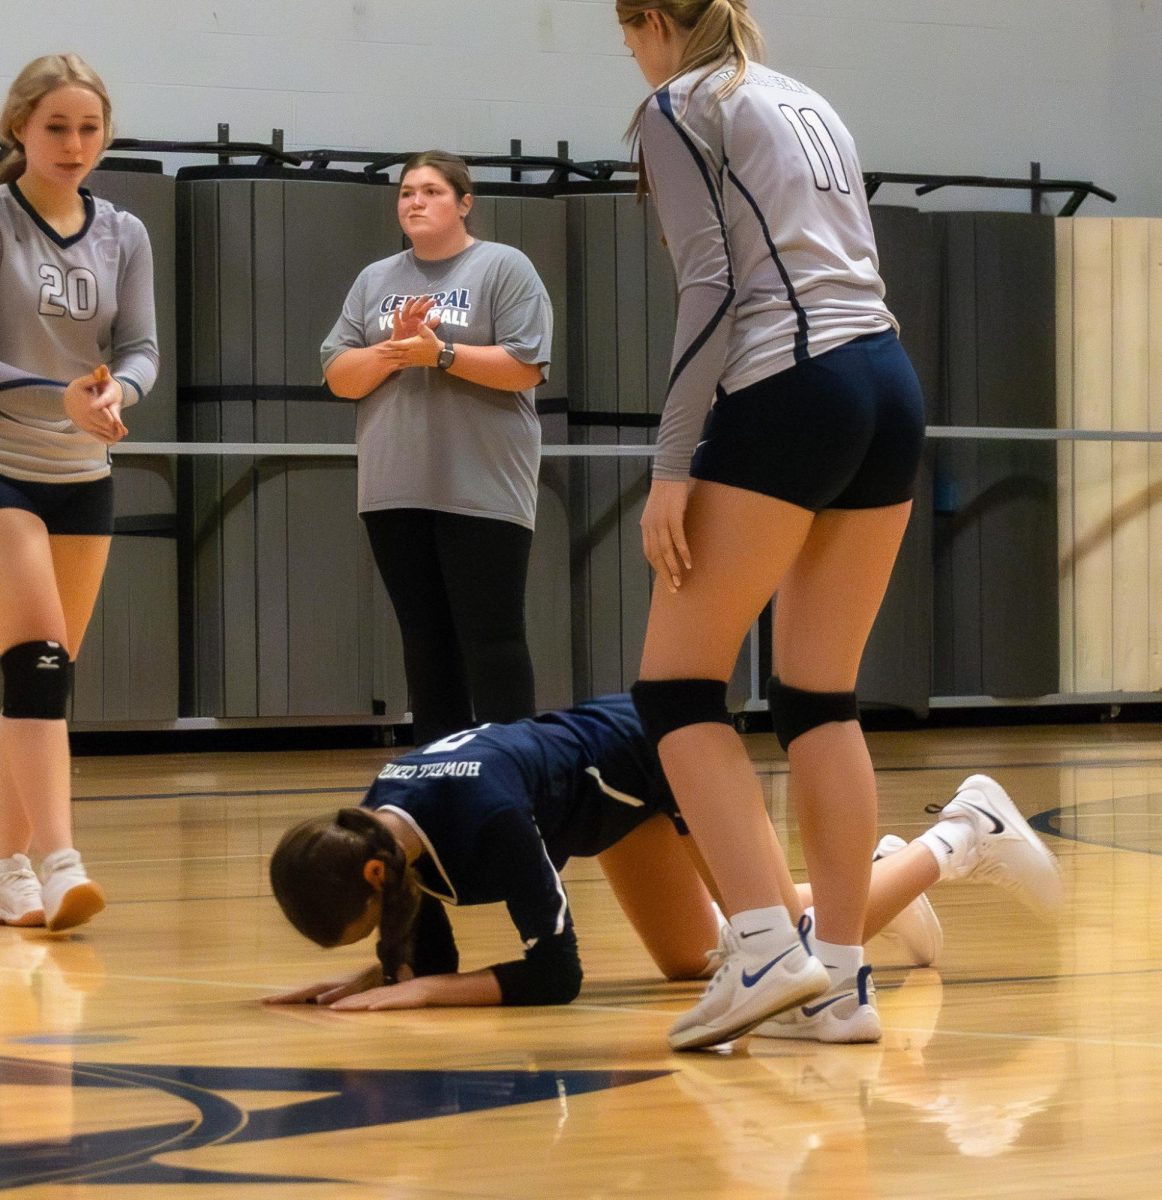 Freshman Natalie Hirth slams the ground in frustration as the Timberland players earn a point. The ball was shy of making it over the net.